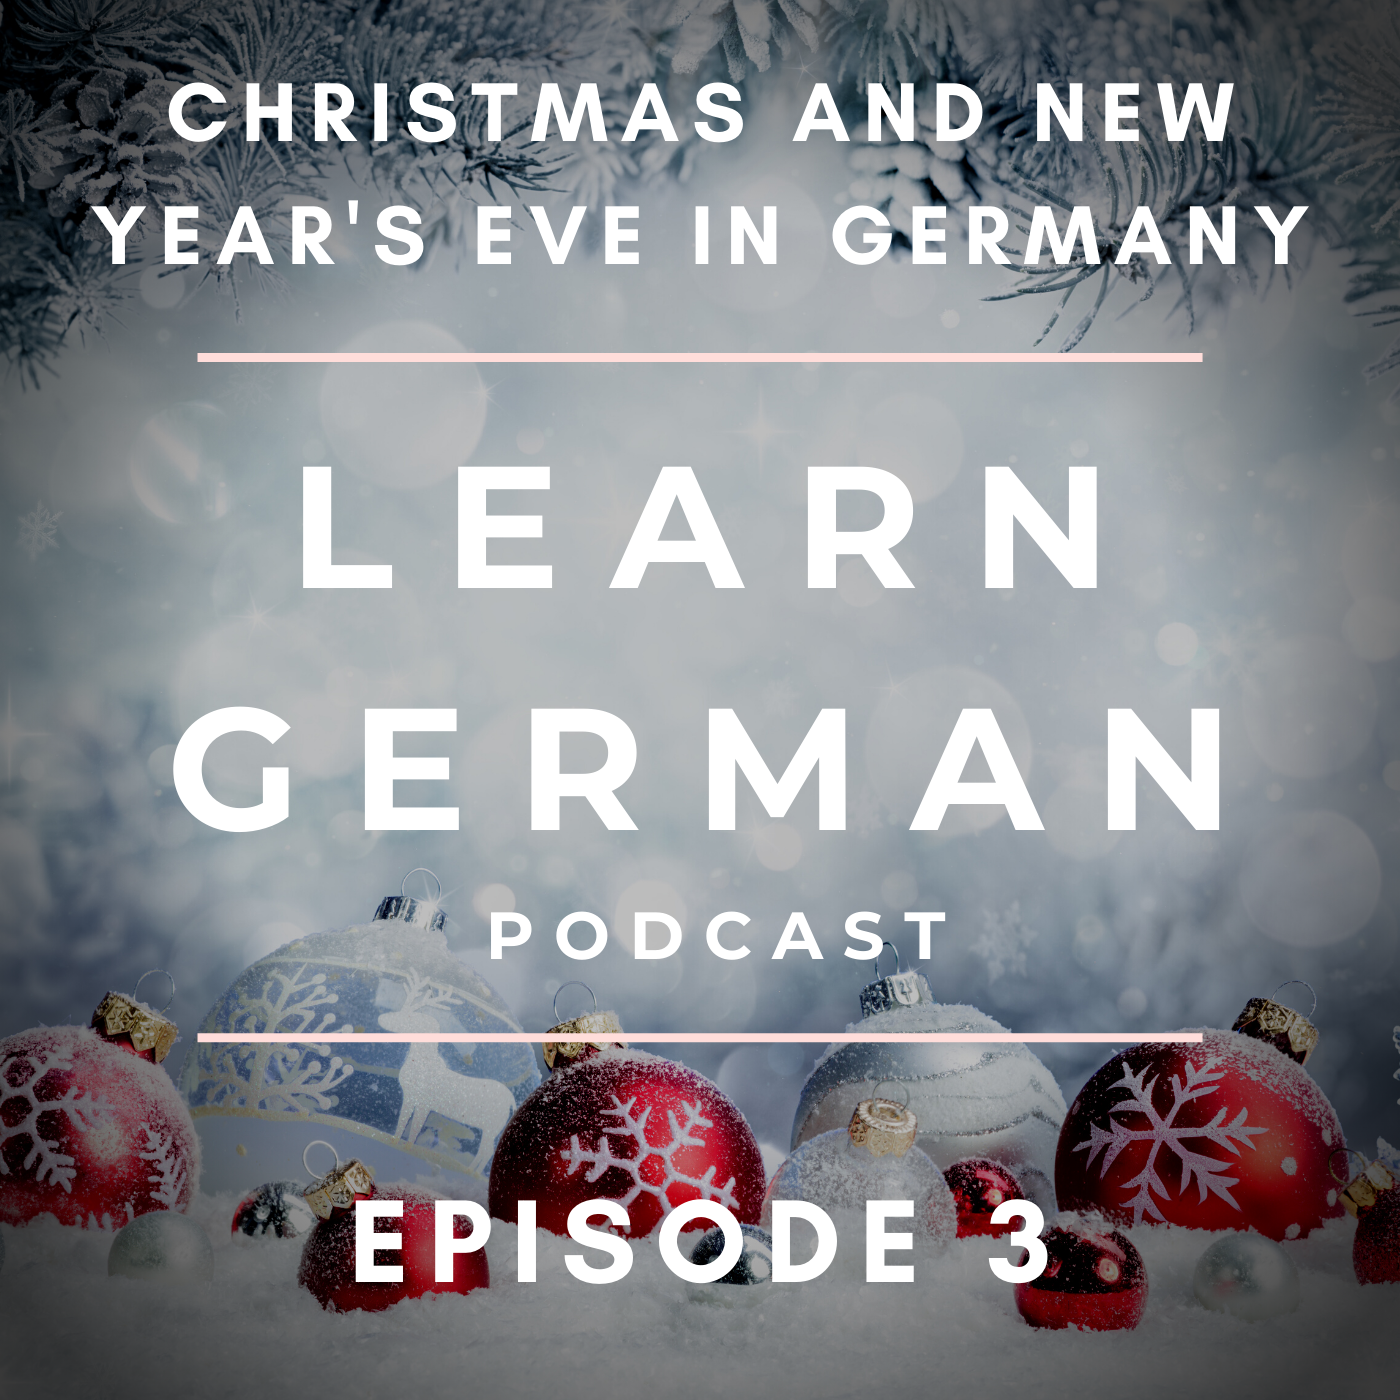 Learn German Podcast: Christmas and New Year's Eve in Germany (Episode 3)